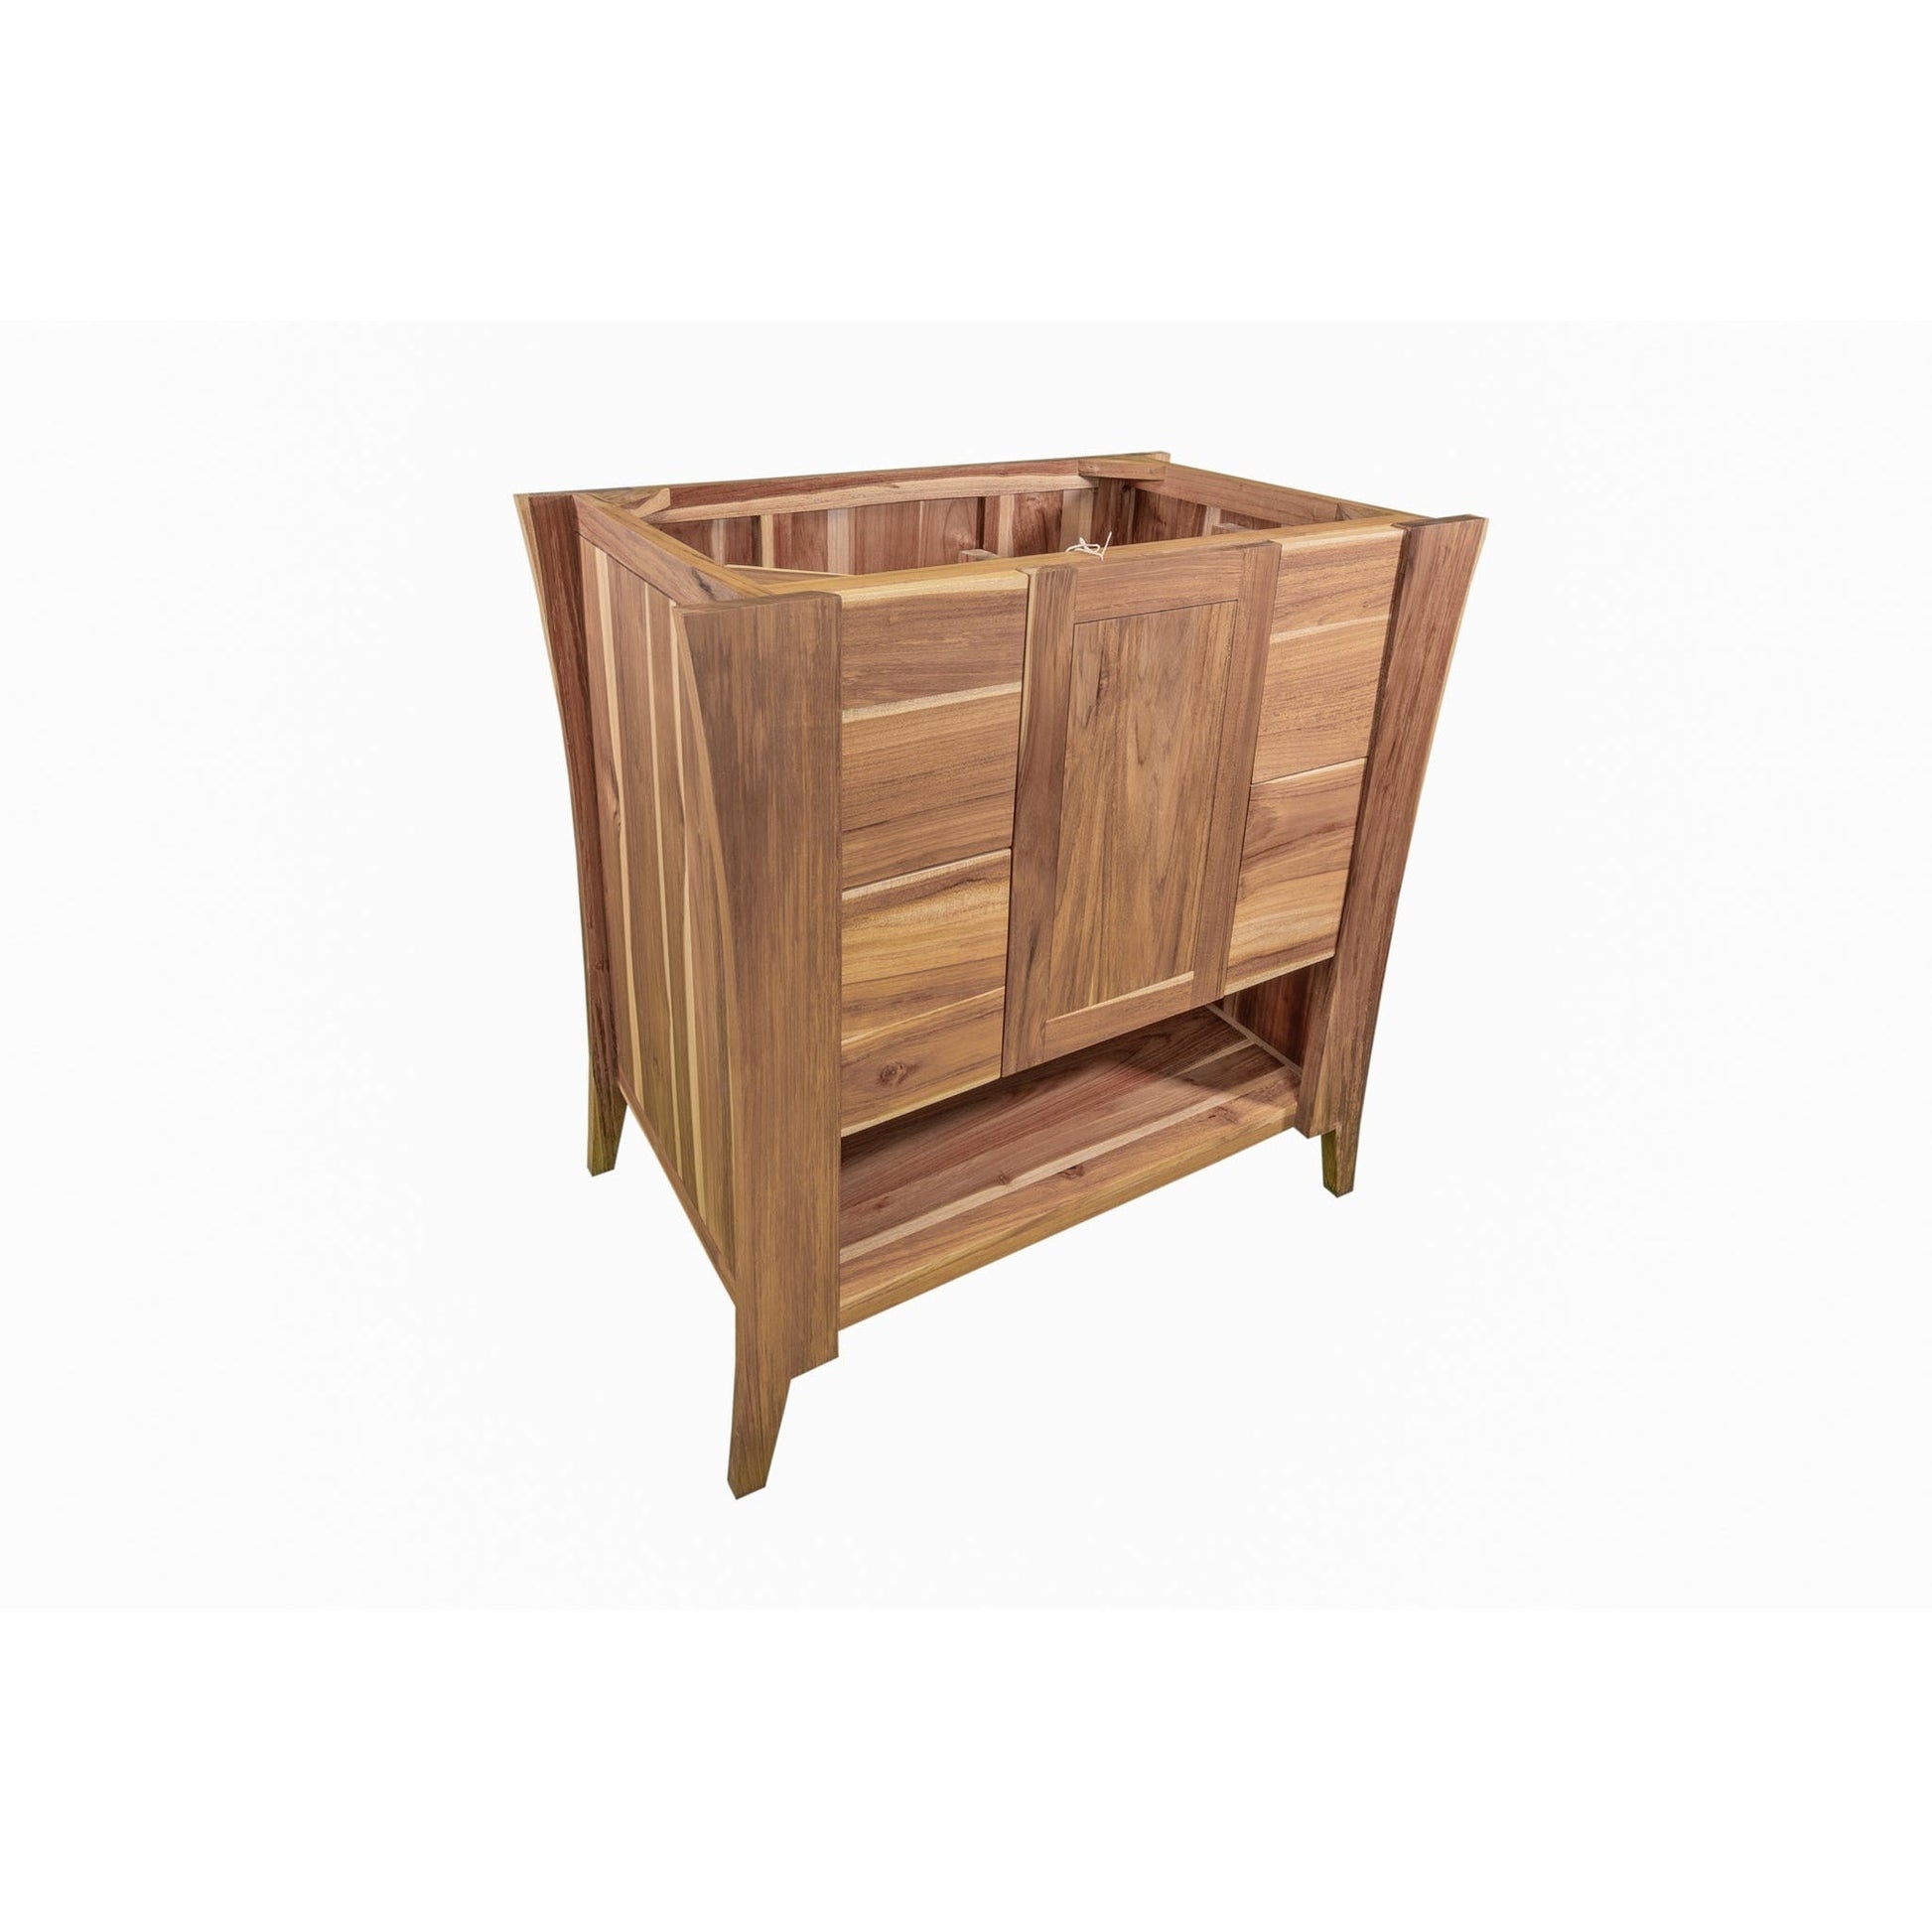 EcoDecors Curvature 36" EarthyTeak Solid Teak Wood Fully Assembled Freestanding Vanity Base For Drop-in Sink